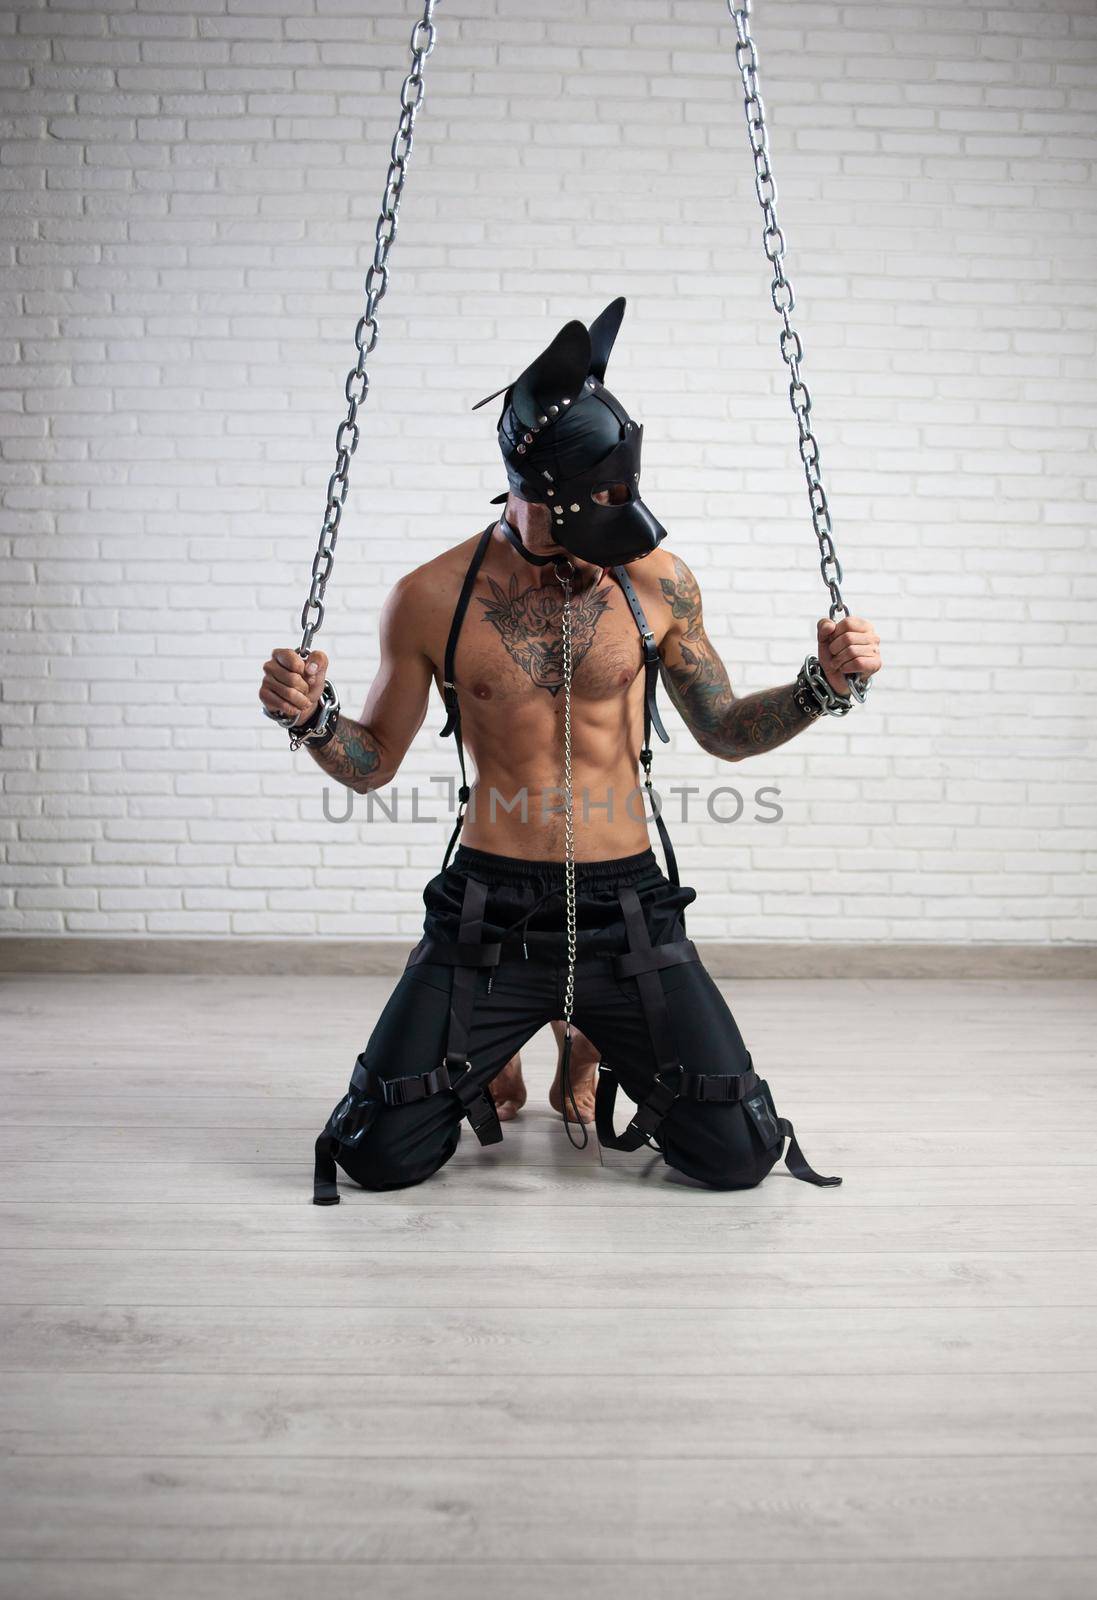 the man in a leather bdsm mask of a dog handcuffed to chains is kneeling against the wall